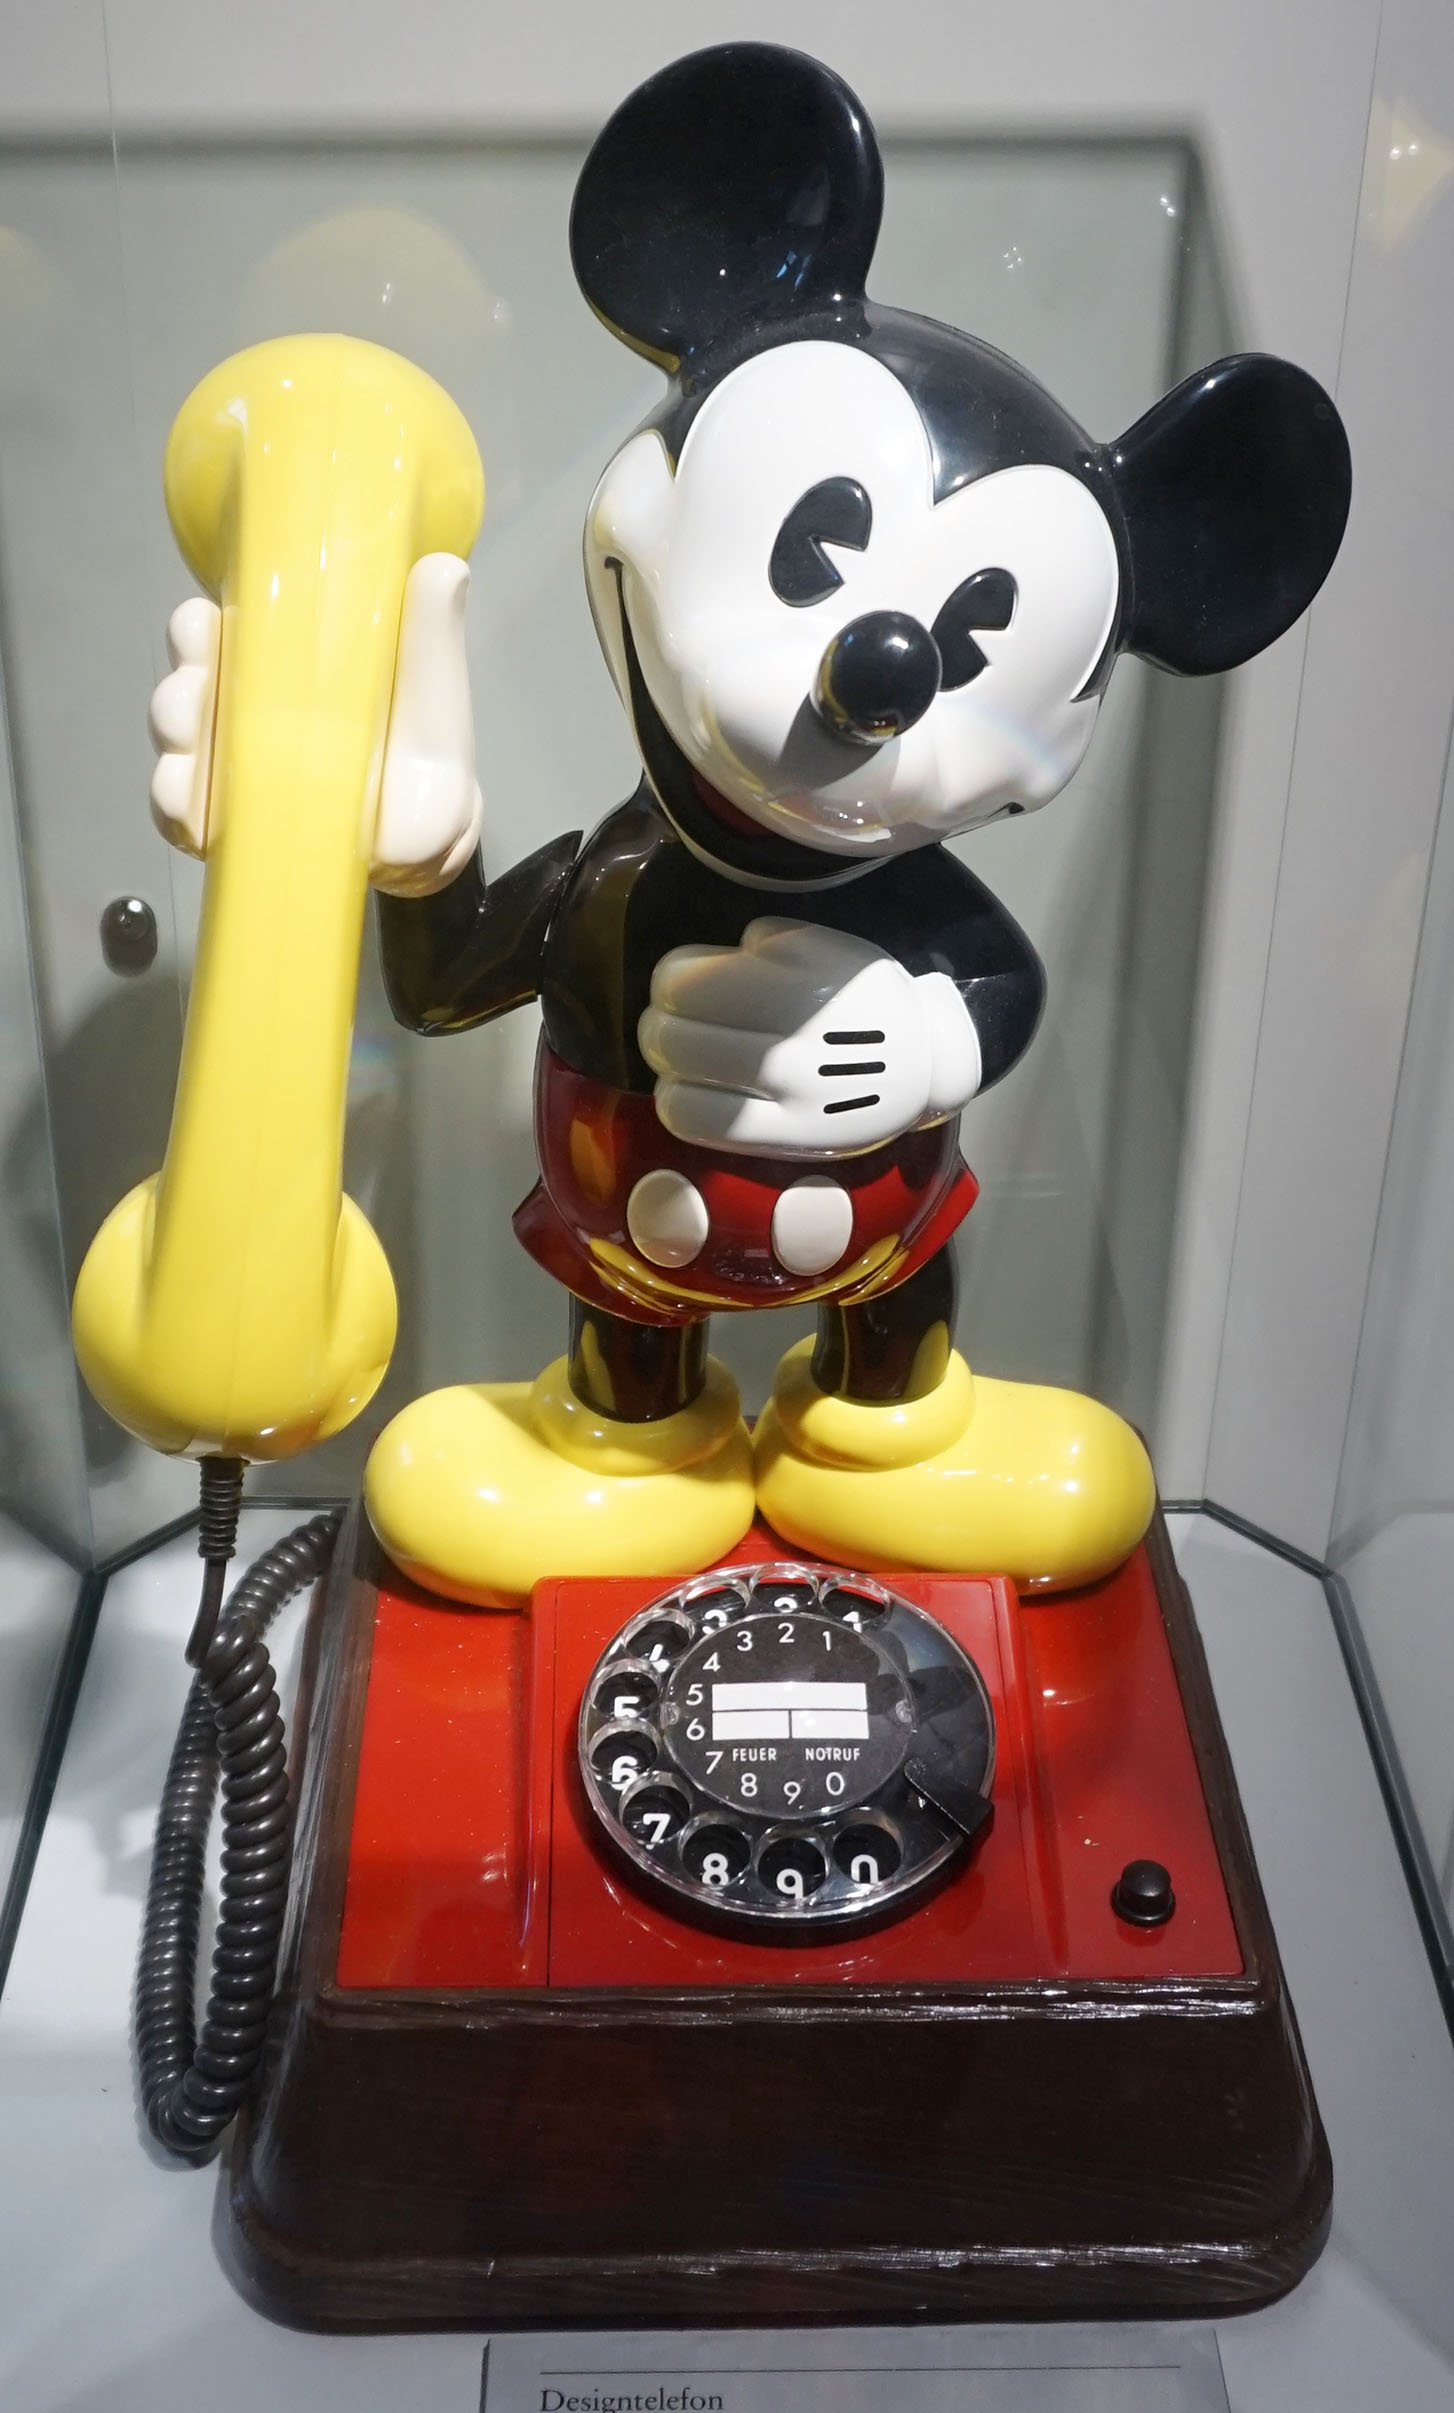 File:Mickey Mouse phone.jpg - Wikimedia Commons